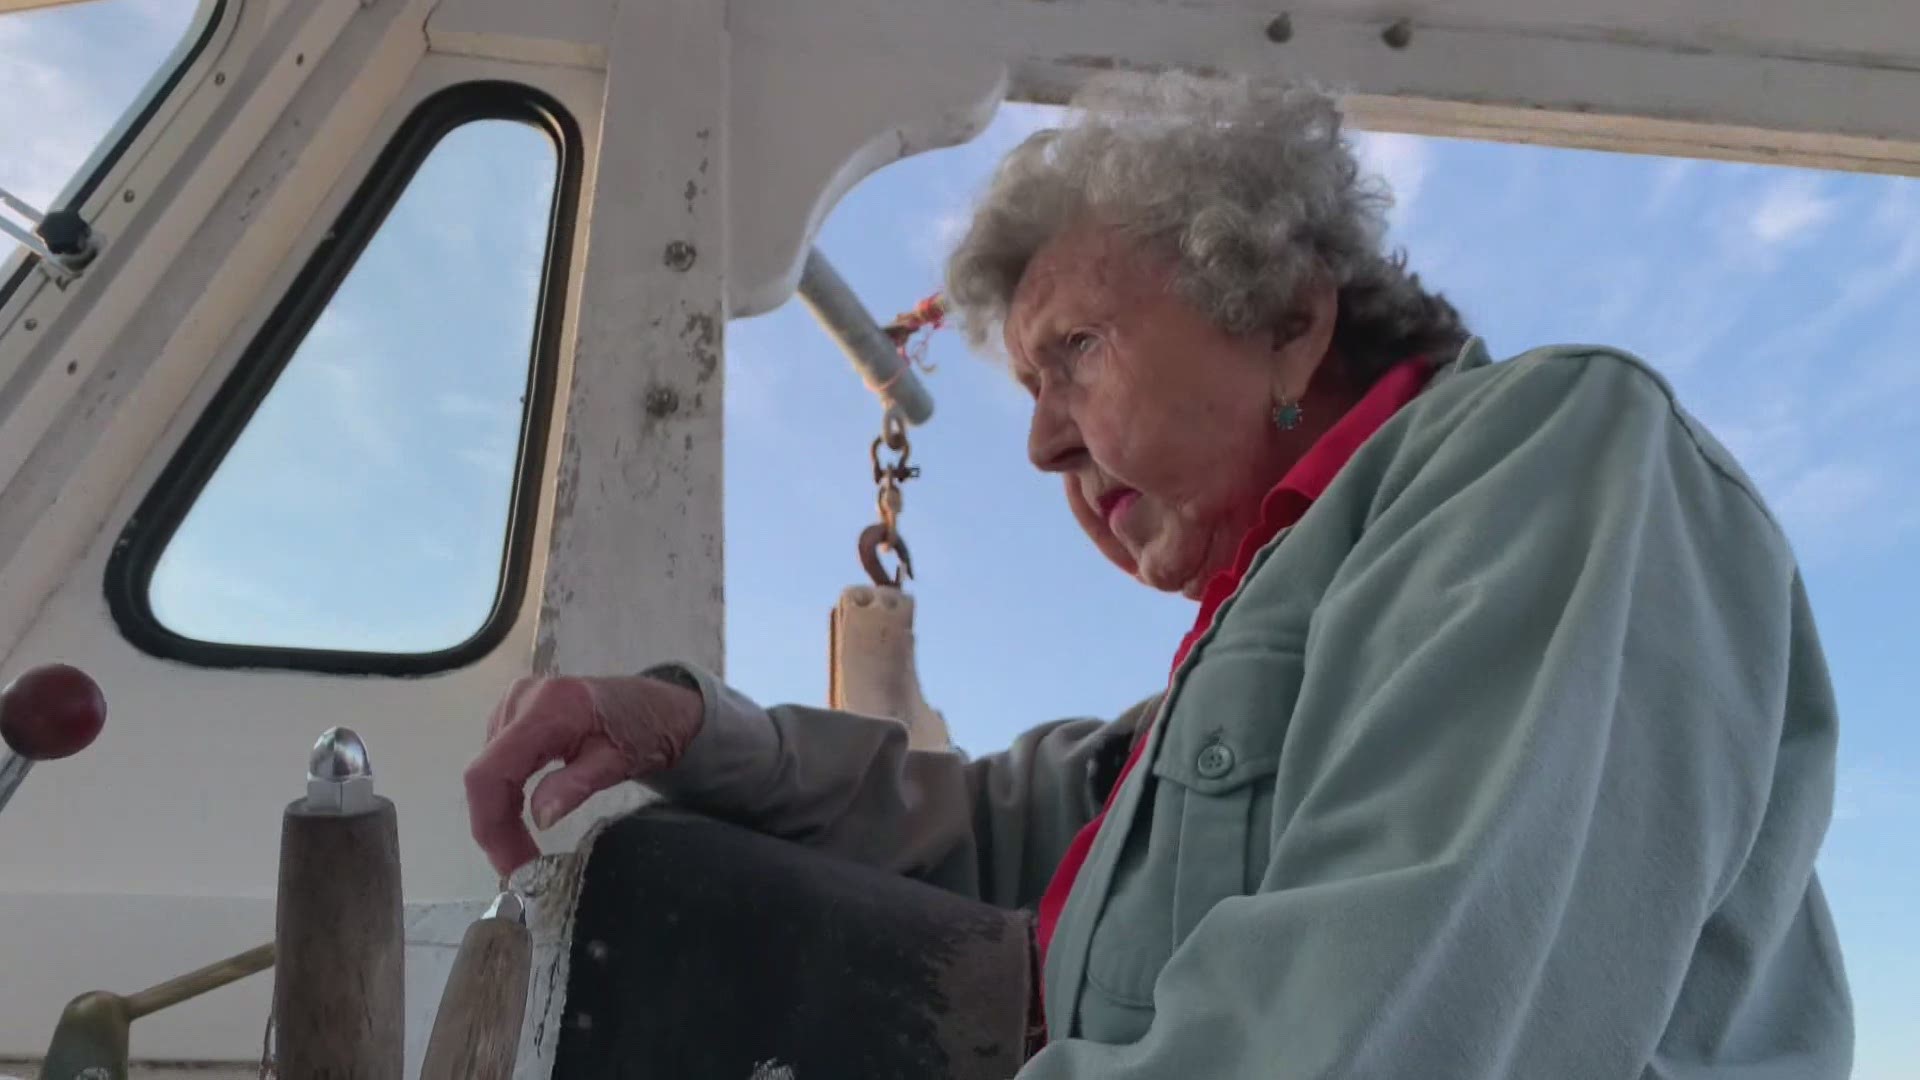 Virginia Oliver, who is 101 years old, has lived in Rockland her whole life and has been lobstering on and off for the last 93 years.